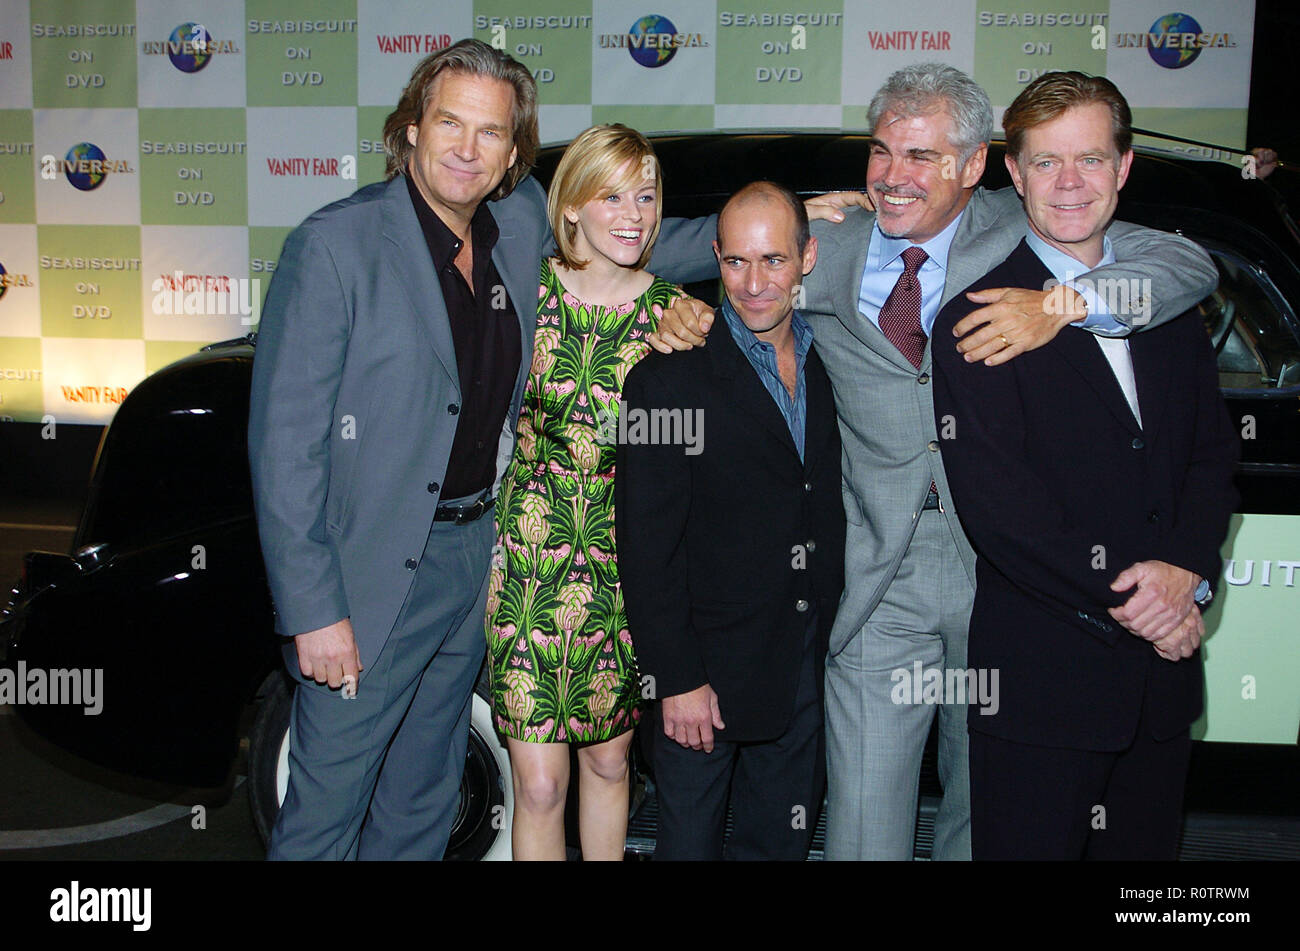 The cast of Seabiscuit ( Jeff Bridge, Elizabeth Banks, Gary Stevens, Gary Ross and William H. Macy )at the party to celebrate the release of ' Seabisc Stock Photo